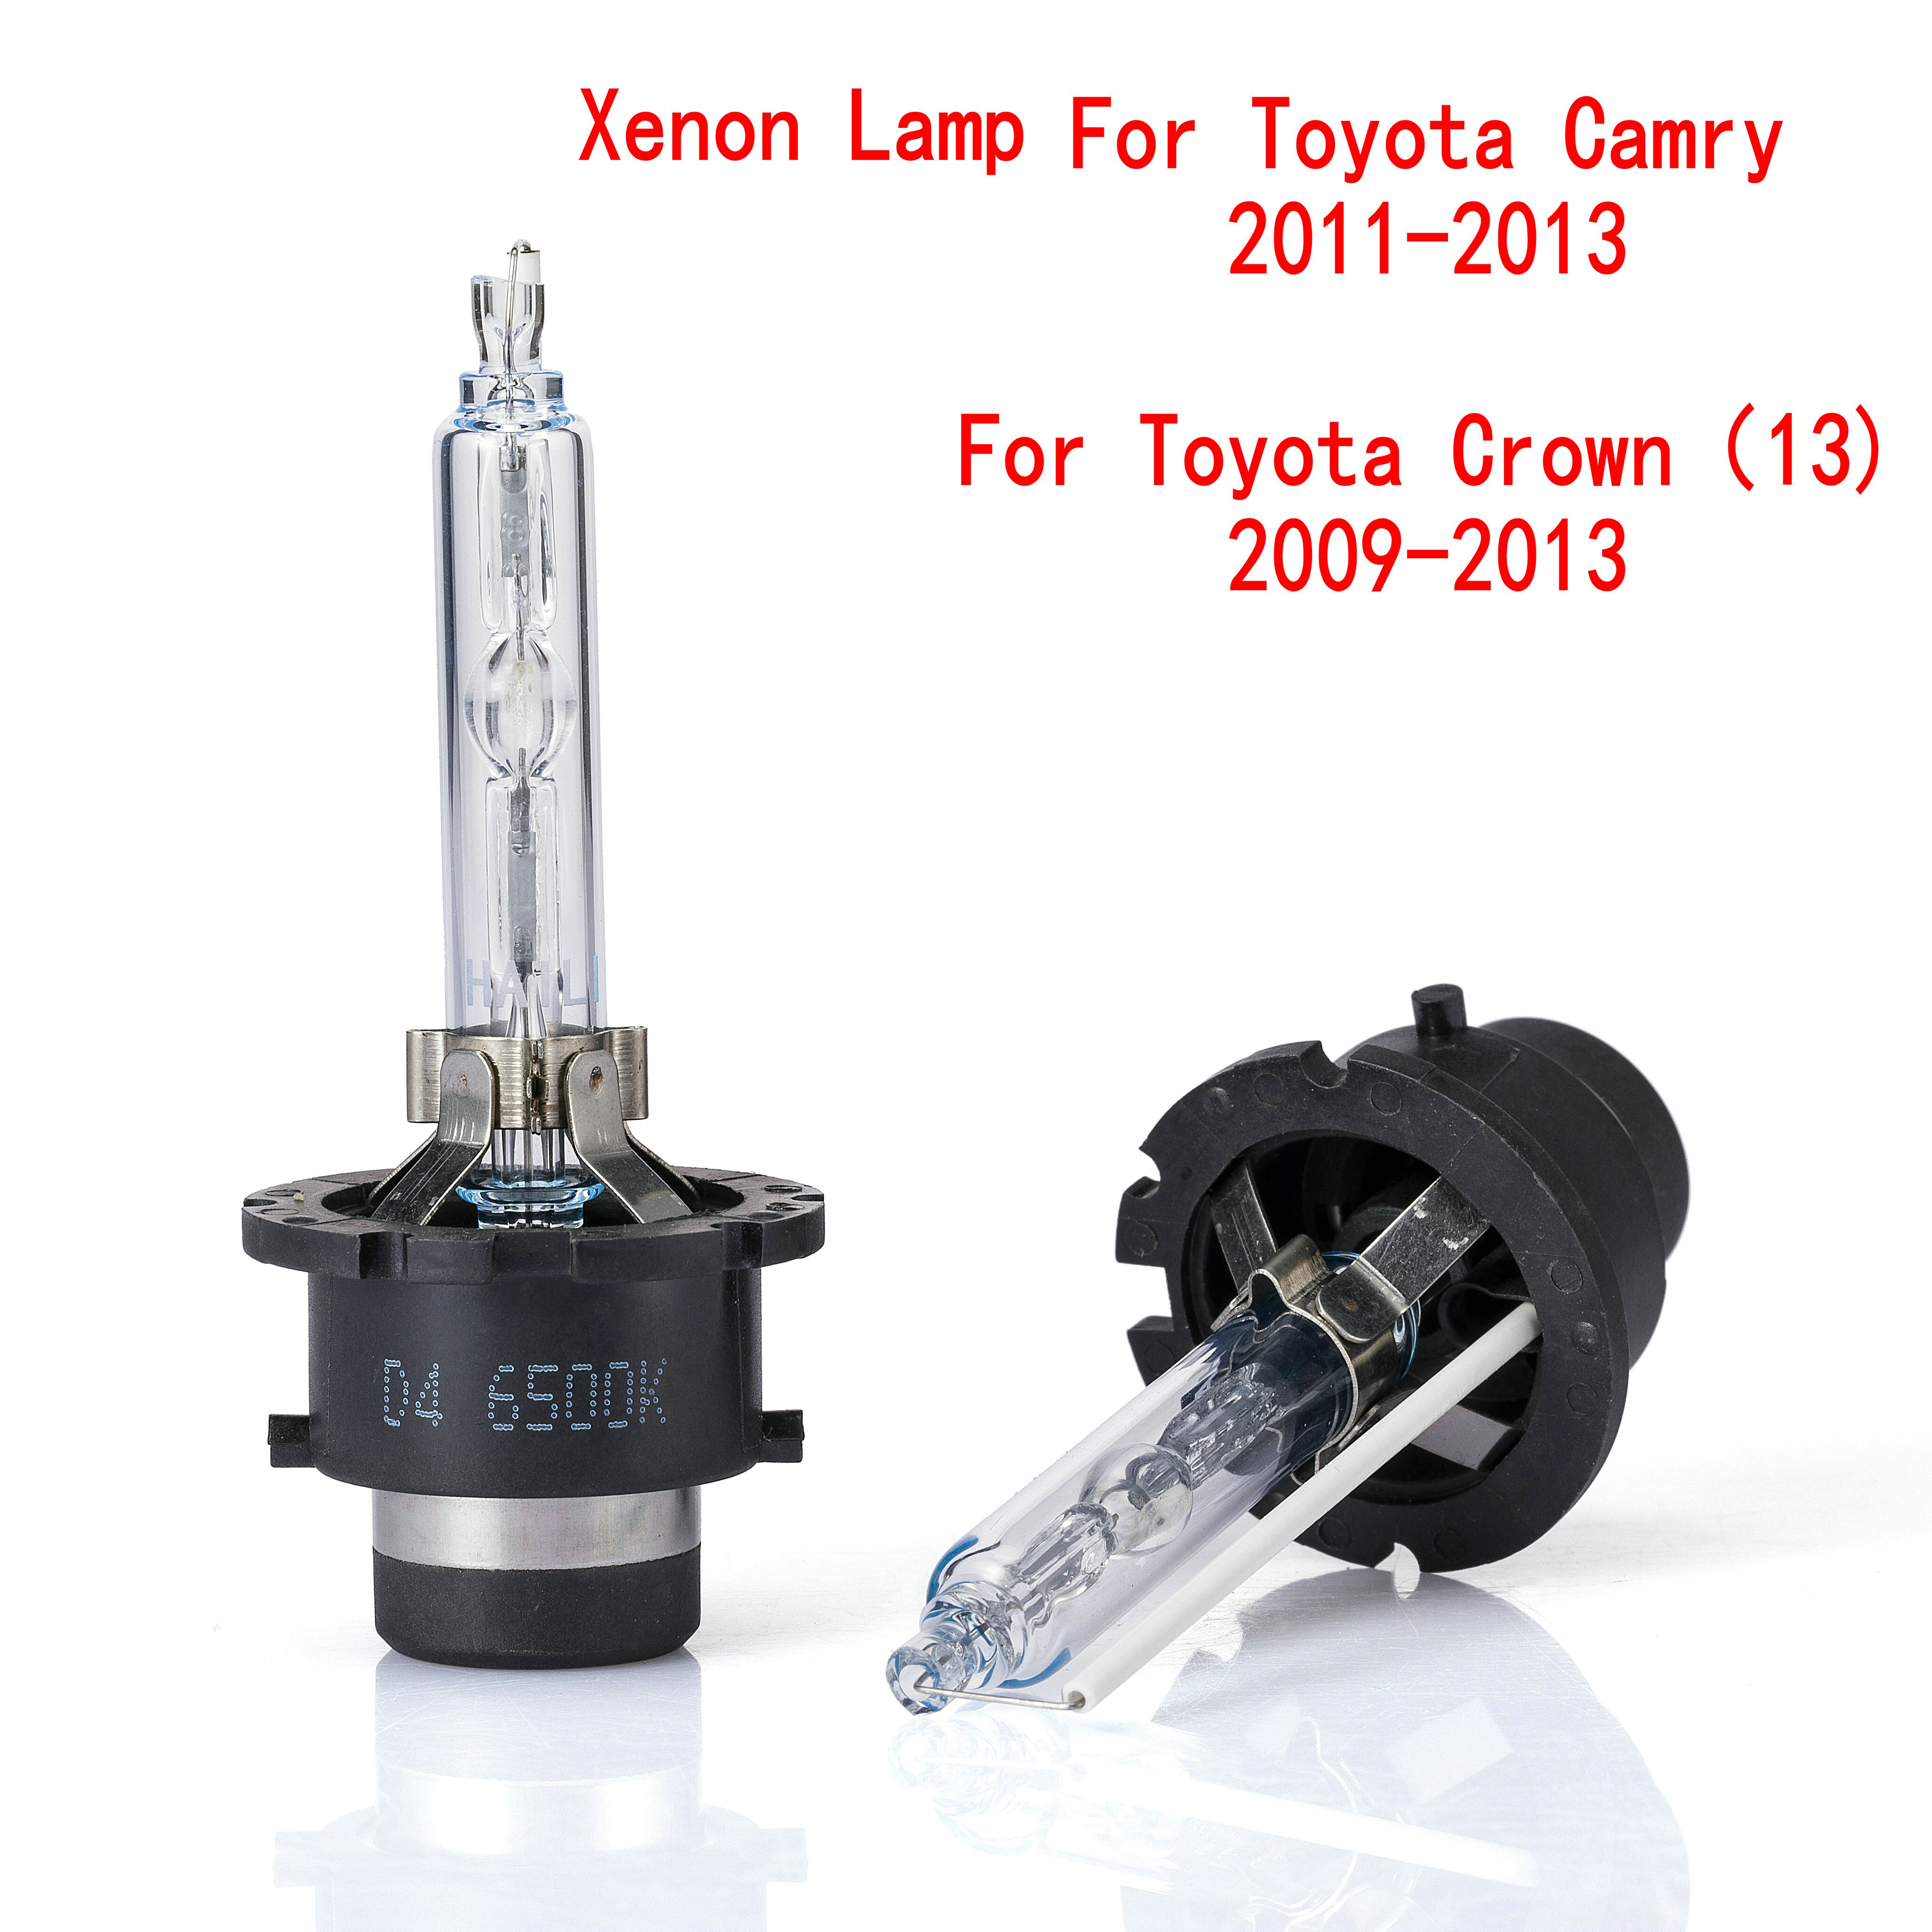 2 Pcs D4S Hid Xenon Lamp Voor Toyota Camry Auto Koplamp Xenon Lamp Voor Toyota Crown